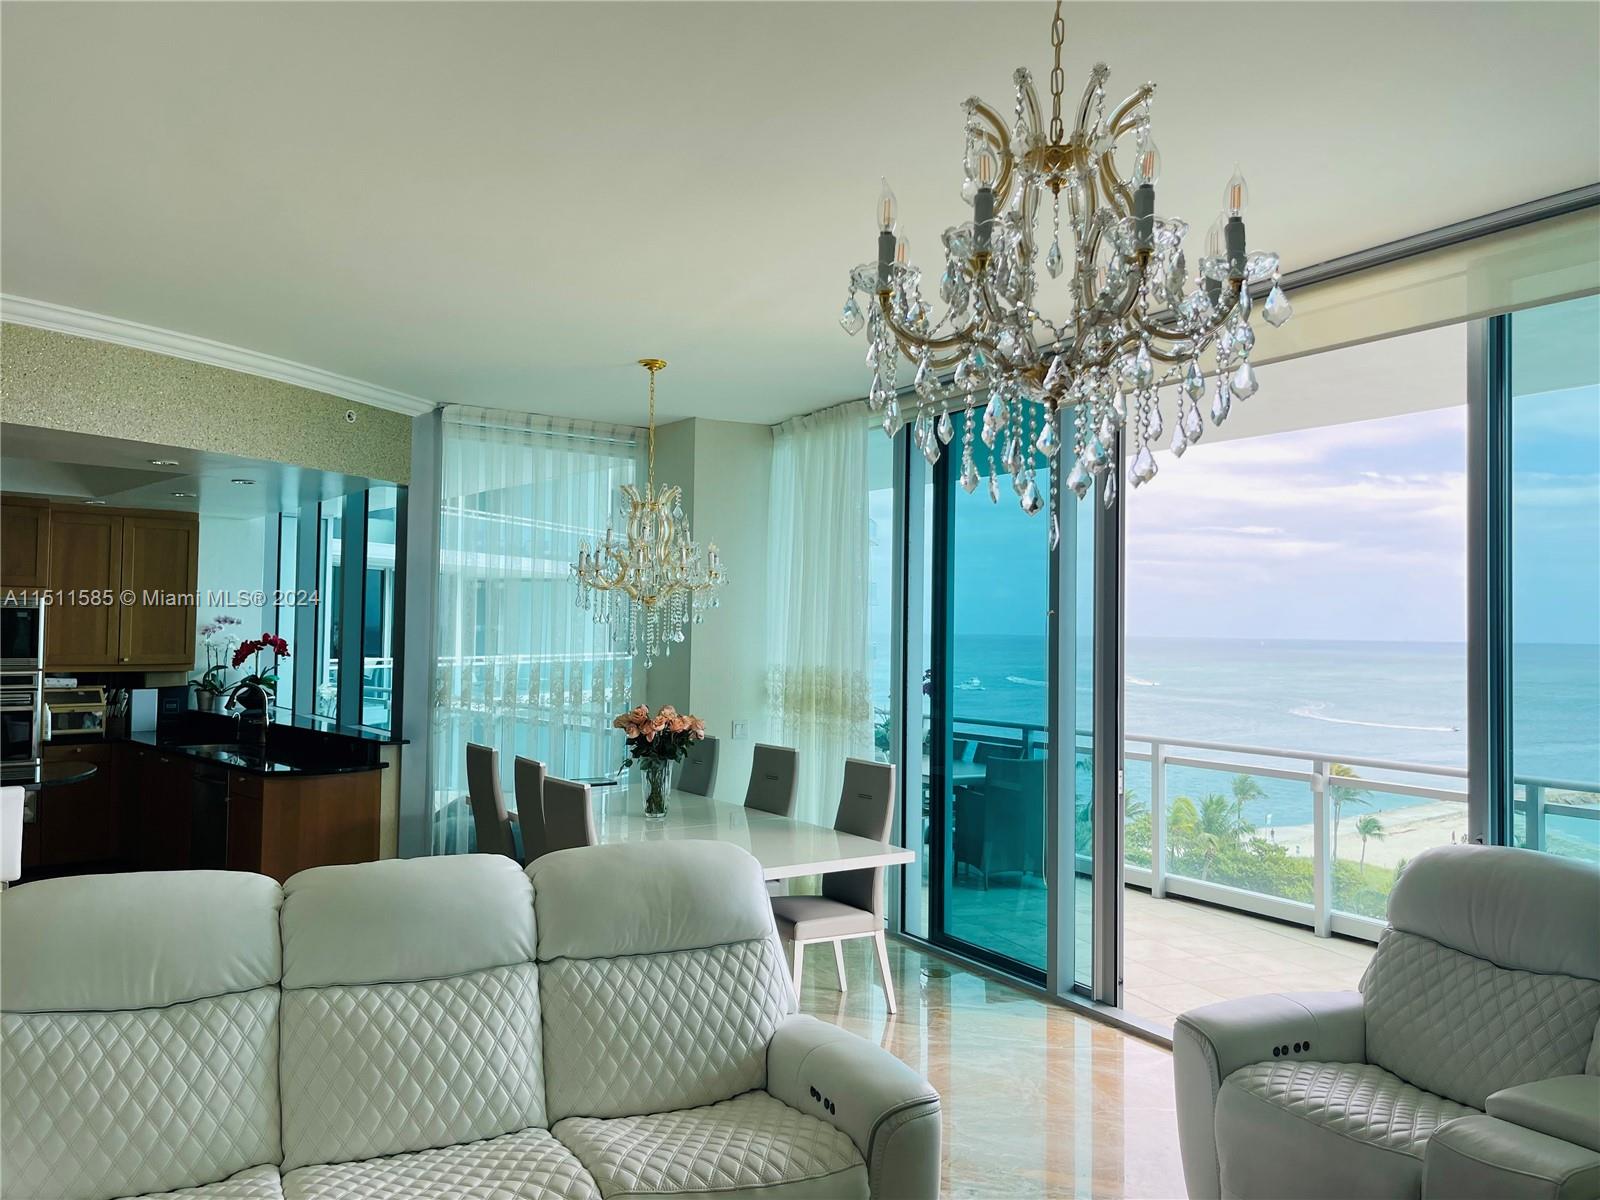 Live in one of the most exclusive neighborhoods in Bal Harbour.The Residences at ONE Bal Harbour is a pristine building that sits on the beach overlooking the ocean with intracoastal waterways just where the ocean meets with intracoastal inlet.The building is only 185 private residences with flow through floor plans with 5 stars hotel services provided by the Ritz Carlton Bl Harbour all inclusive. the property offers views from east to west from every room. the location offers world class shopping, a venue of restaurants ,5 stars hotels, private and luxury transportation services.